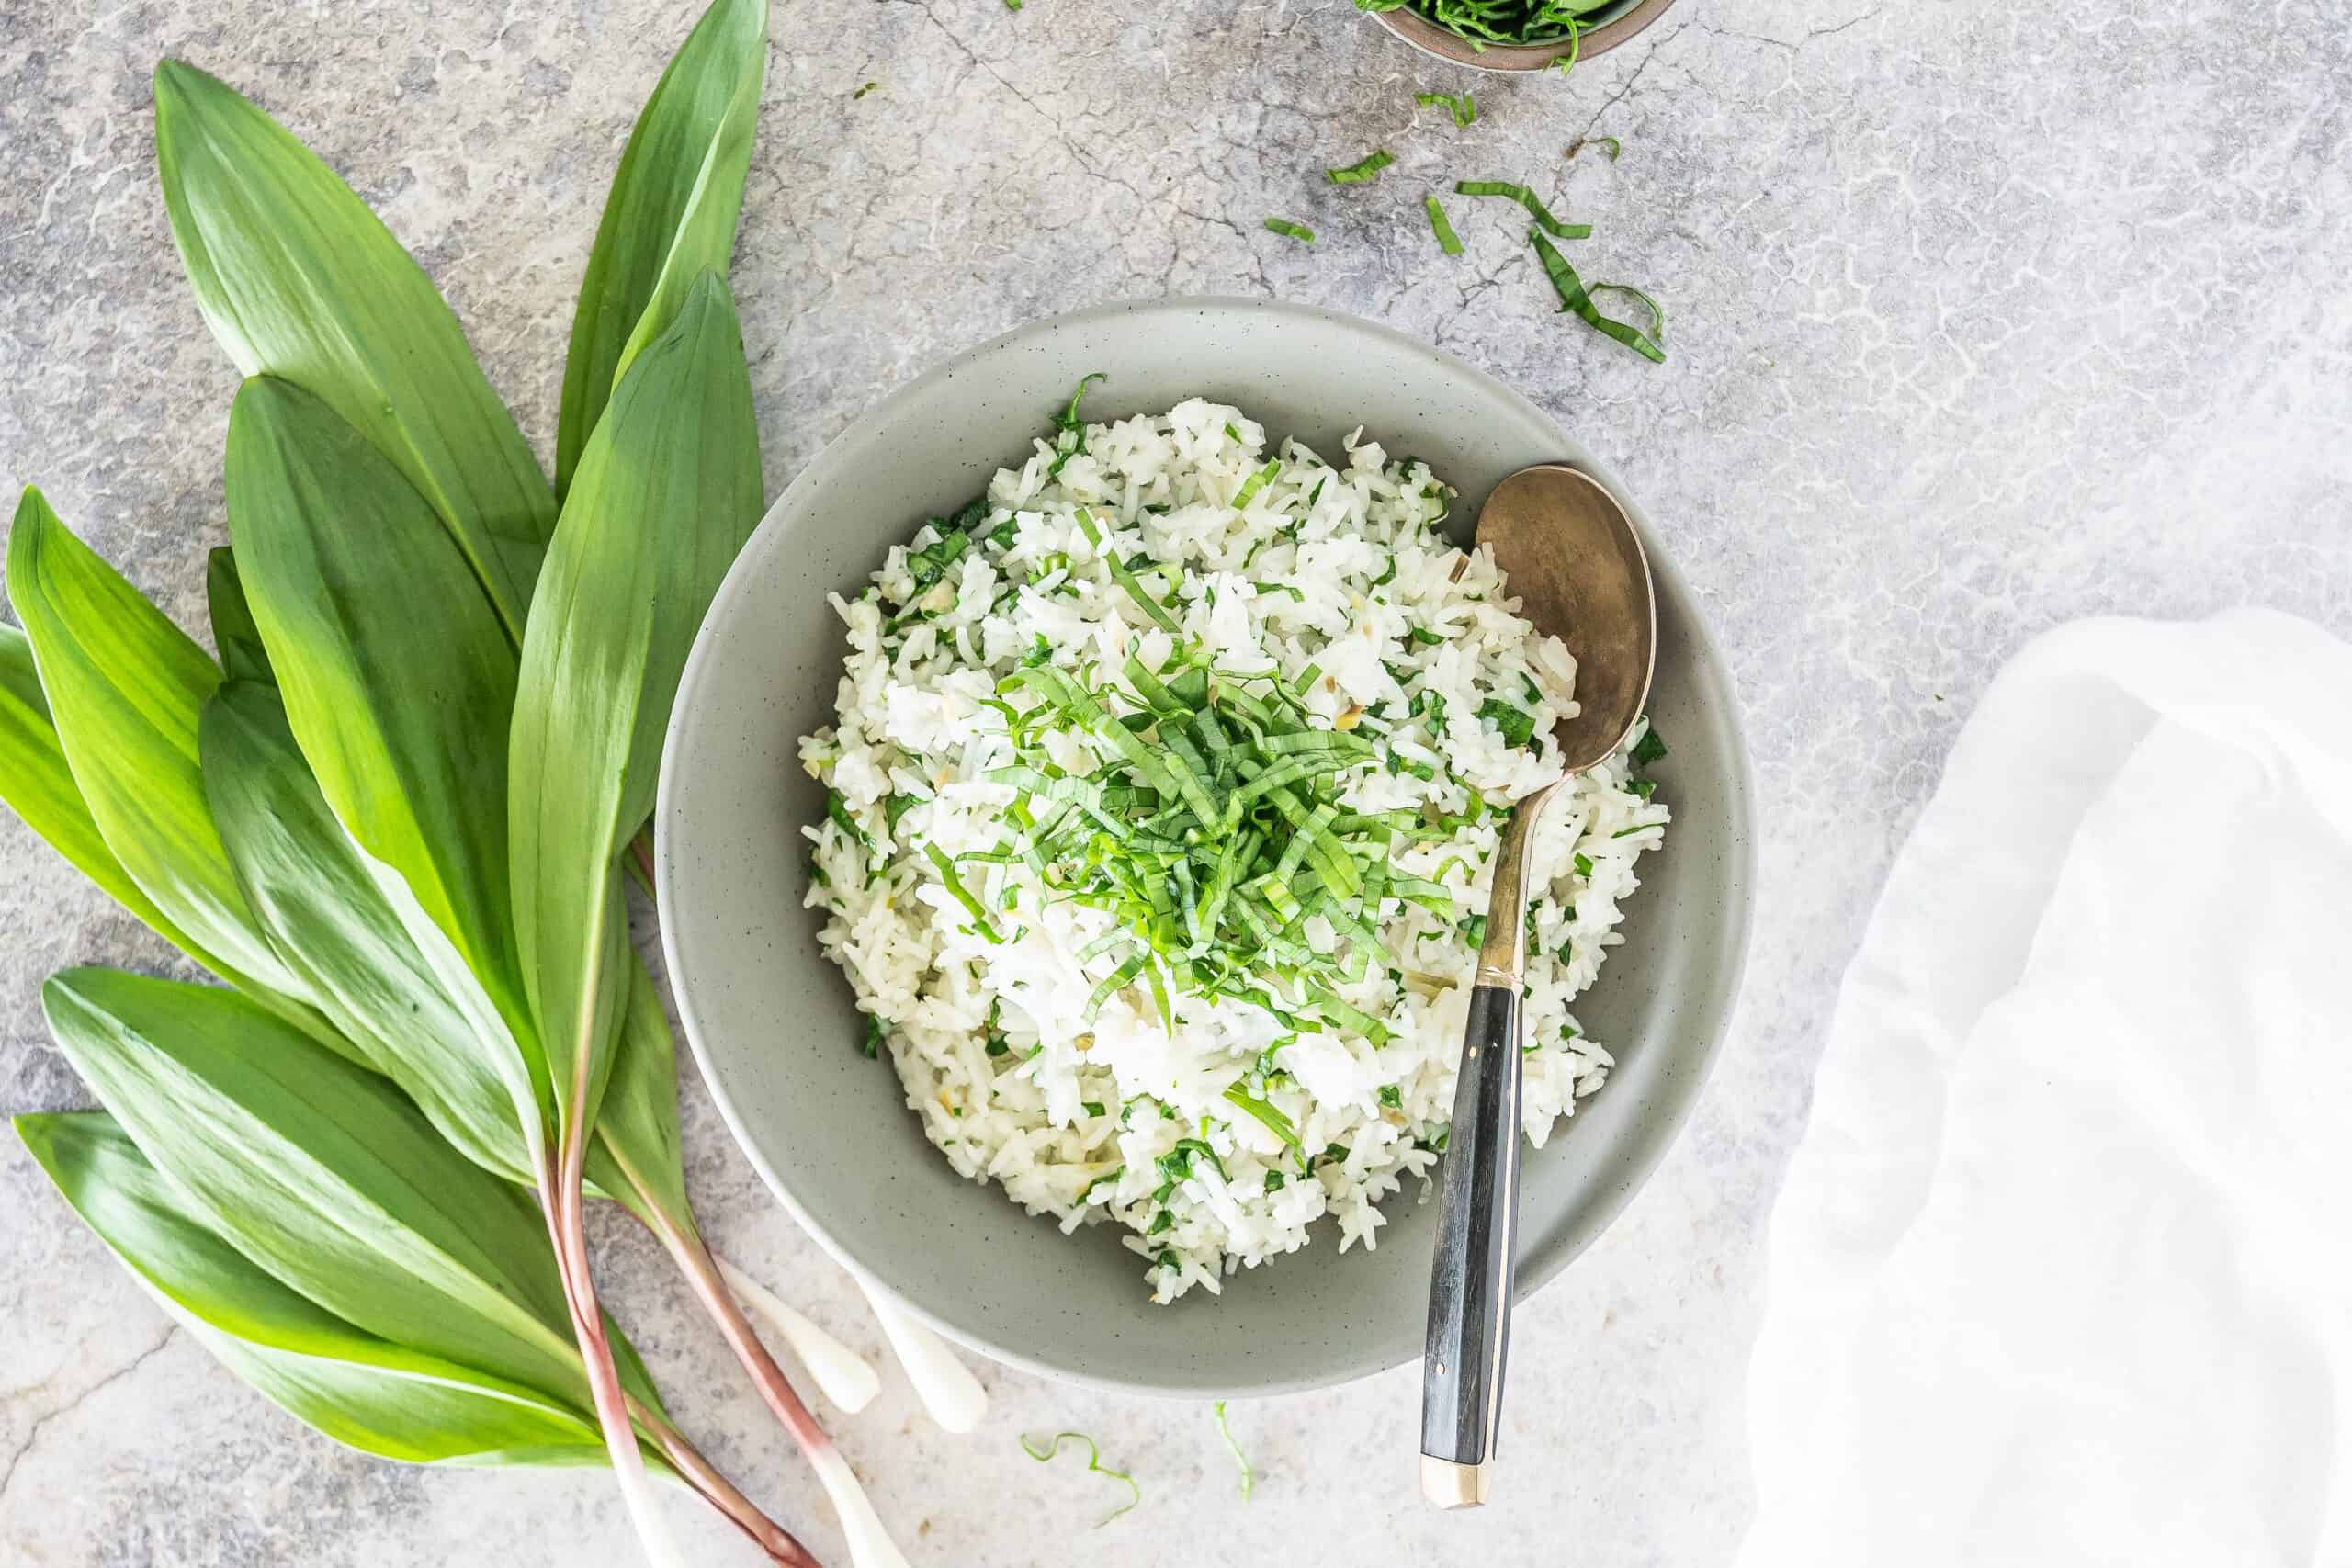 white rice with ramps on the side in a grey bowl